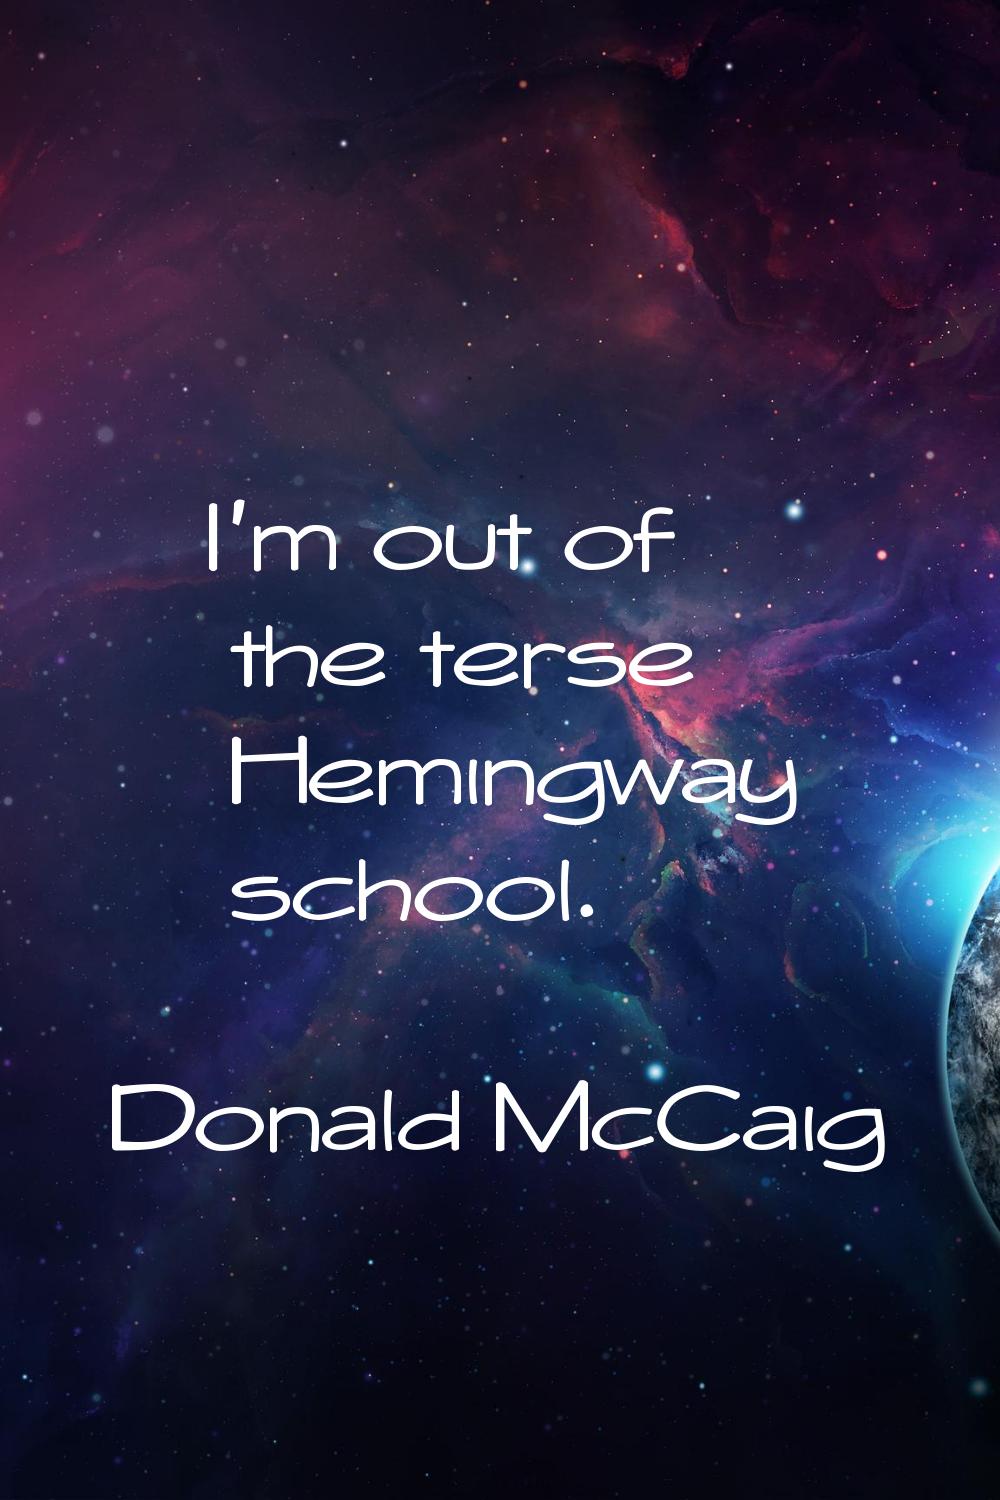 I'm out of the terse Hemingway school.